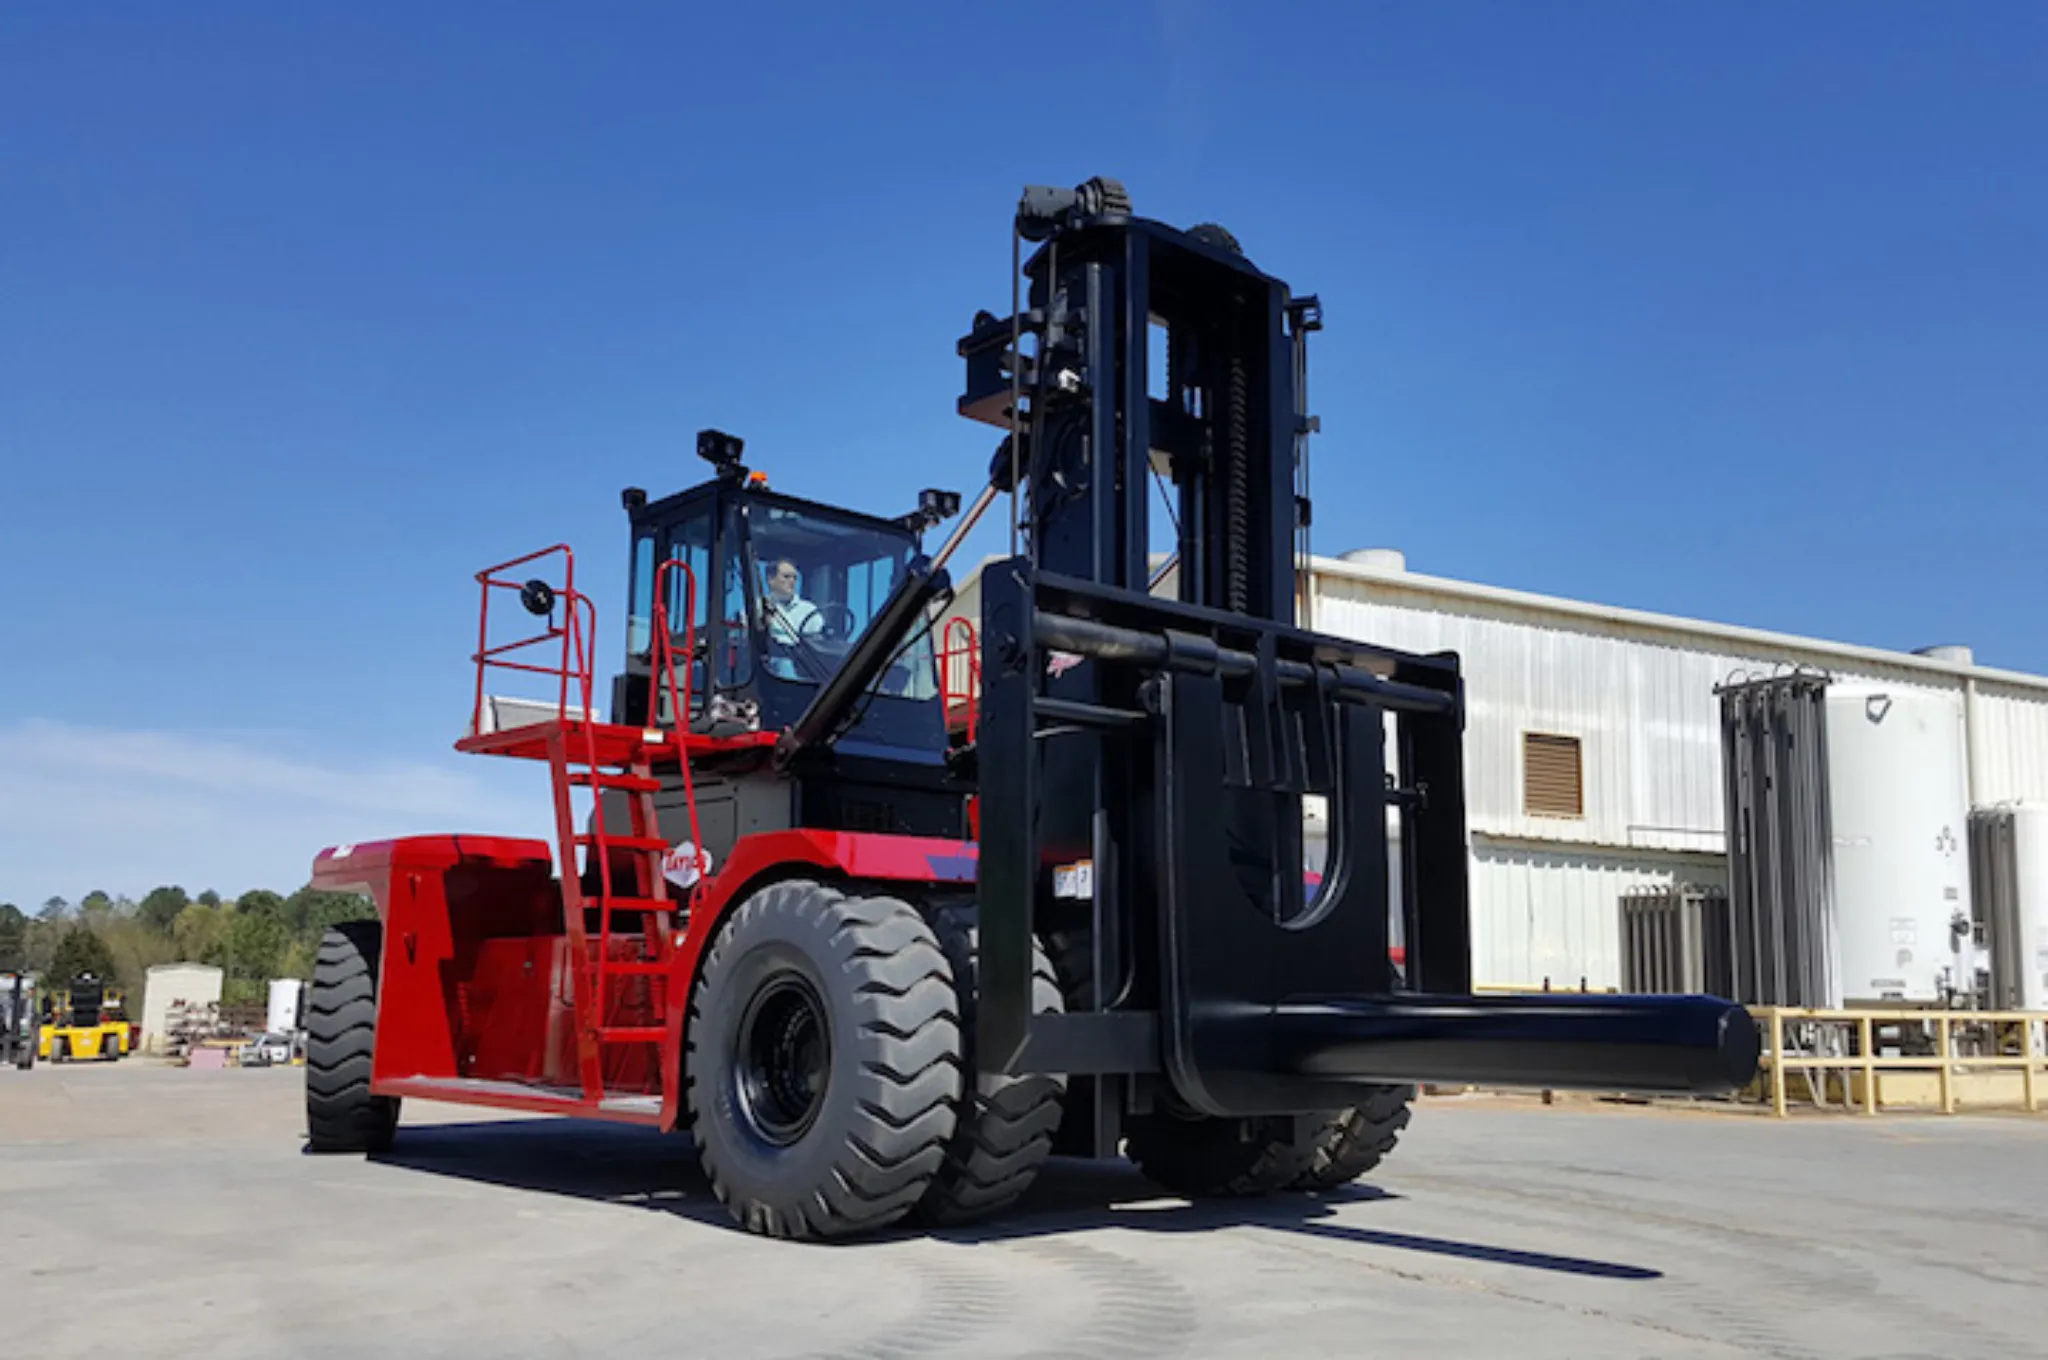 Taylor X-925L High Capacity Forklift